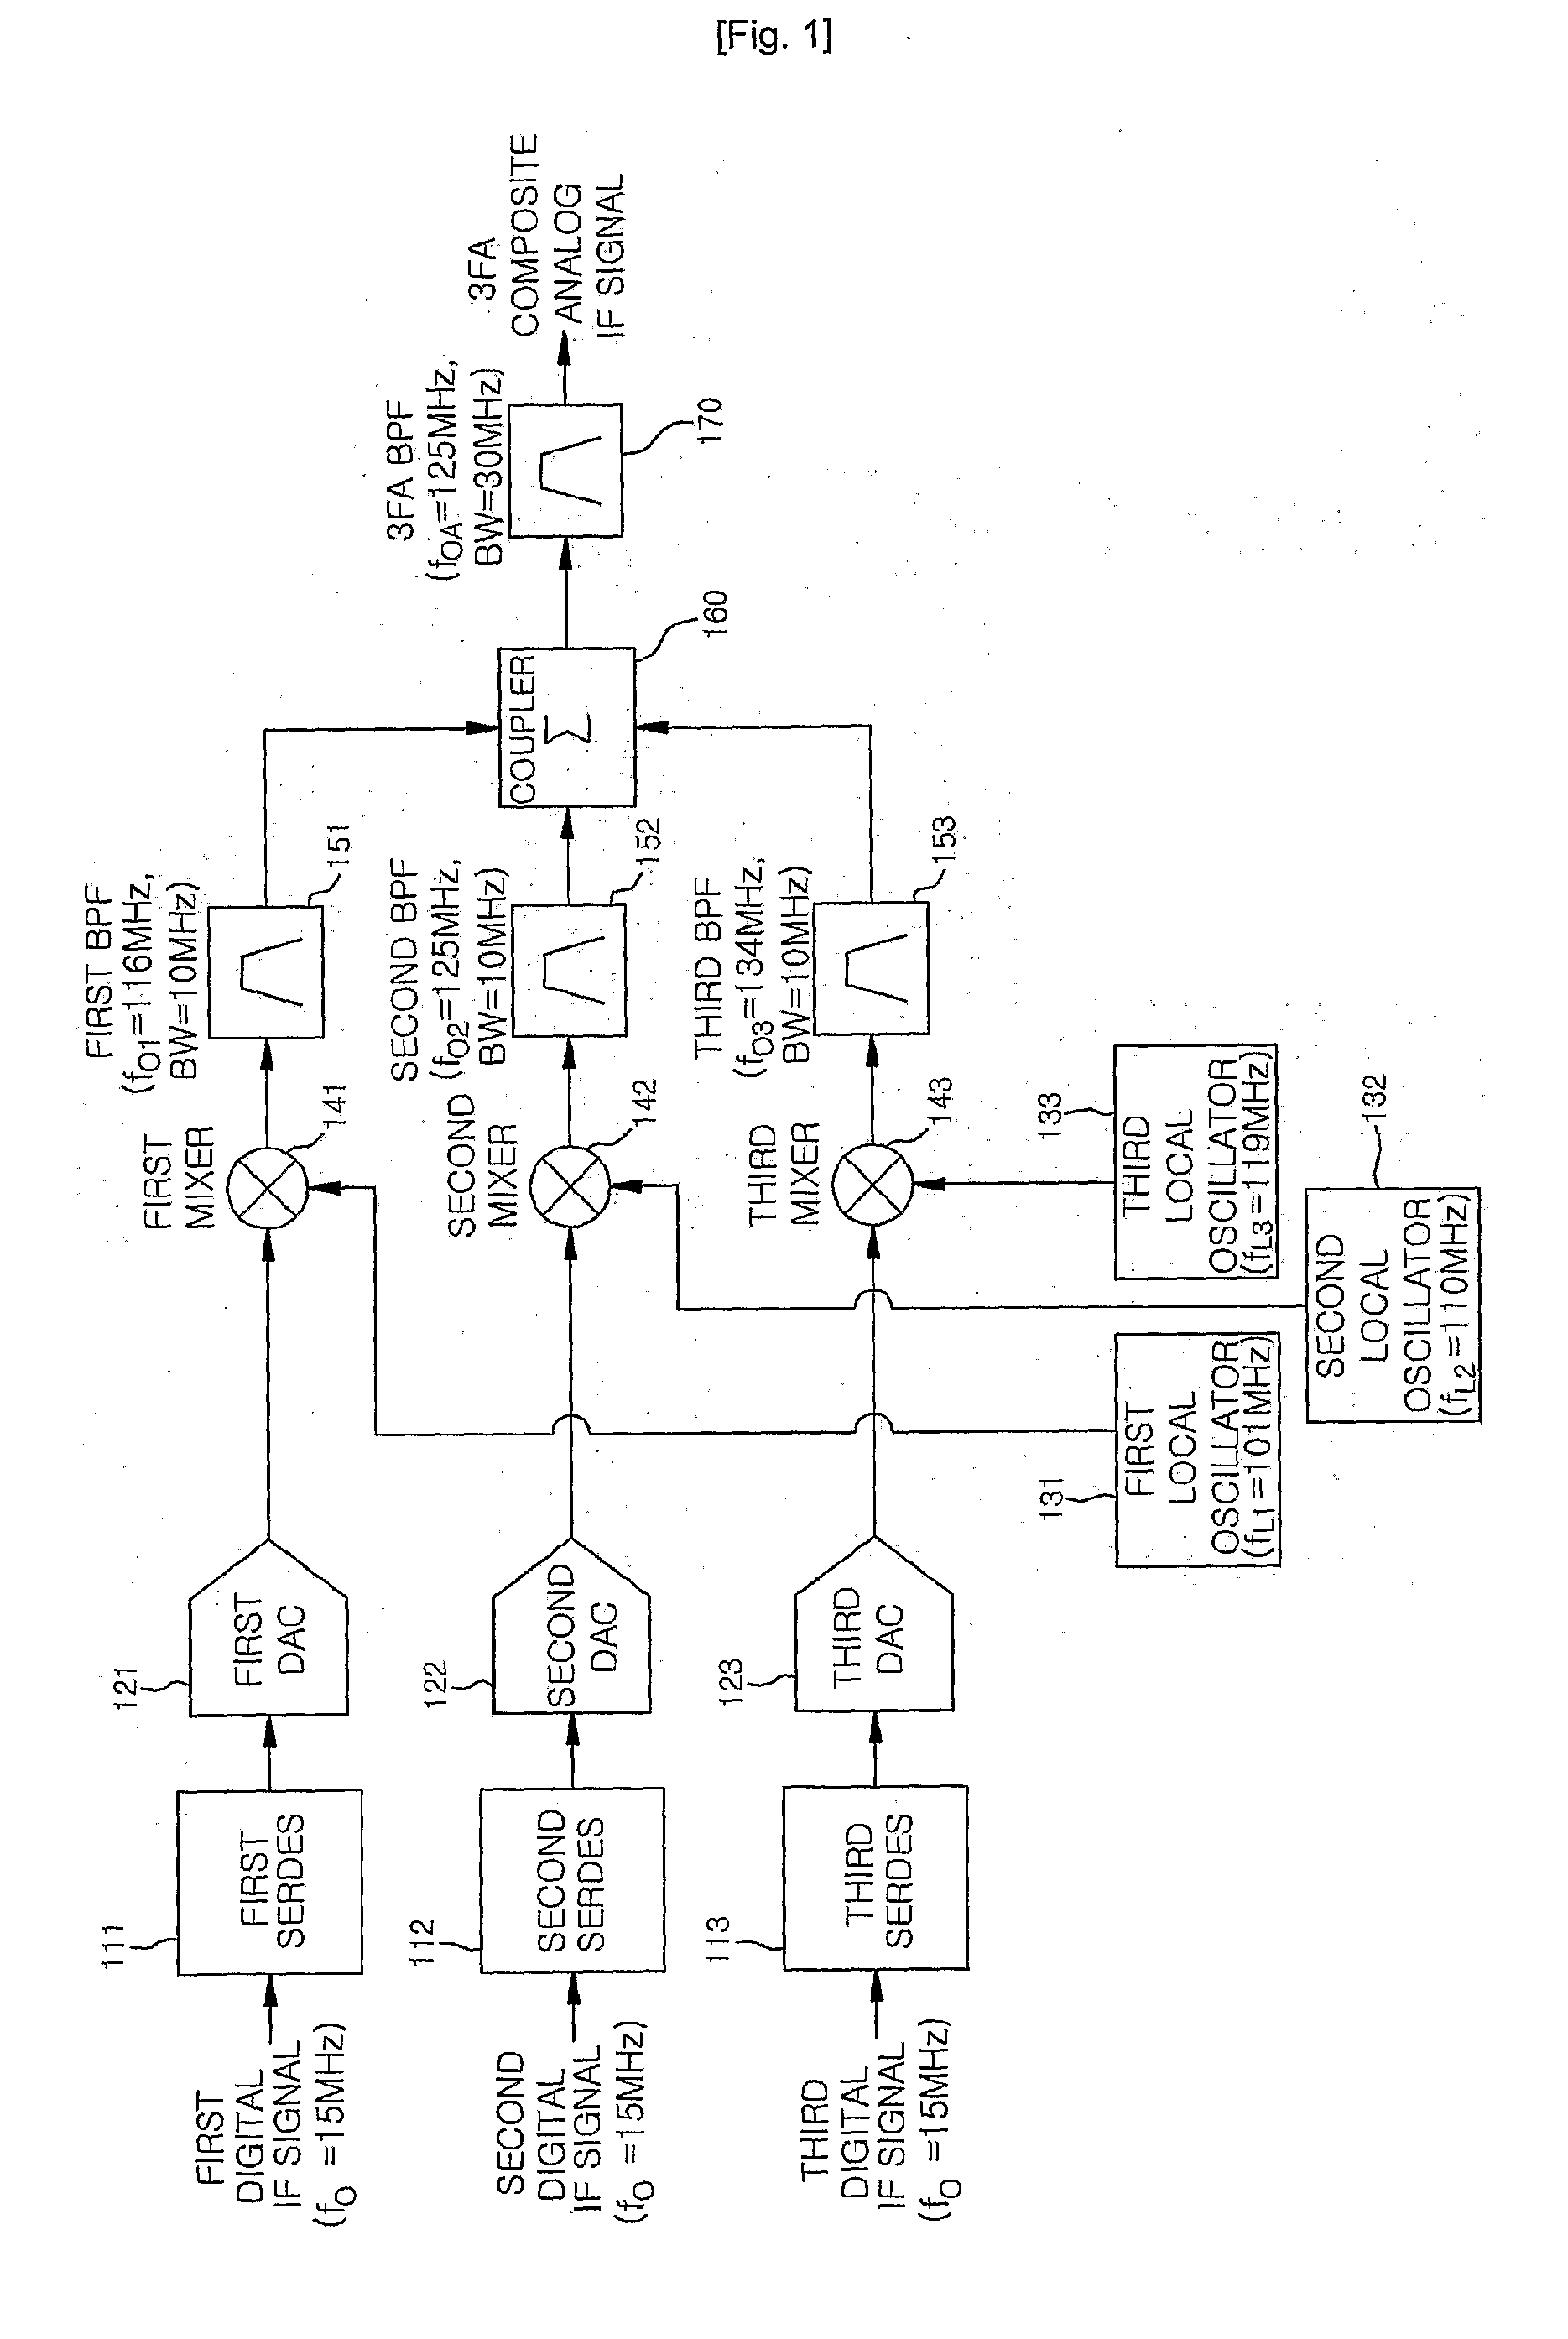 Apparatus and method for digital frequency up-conversion